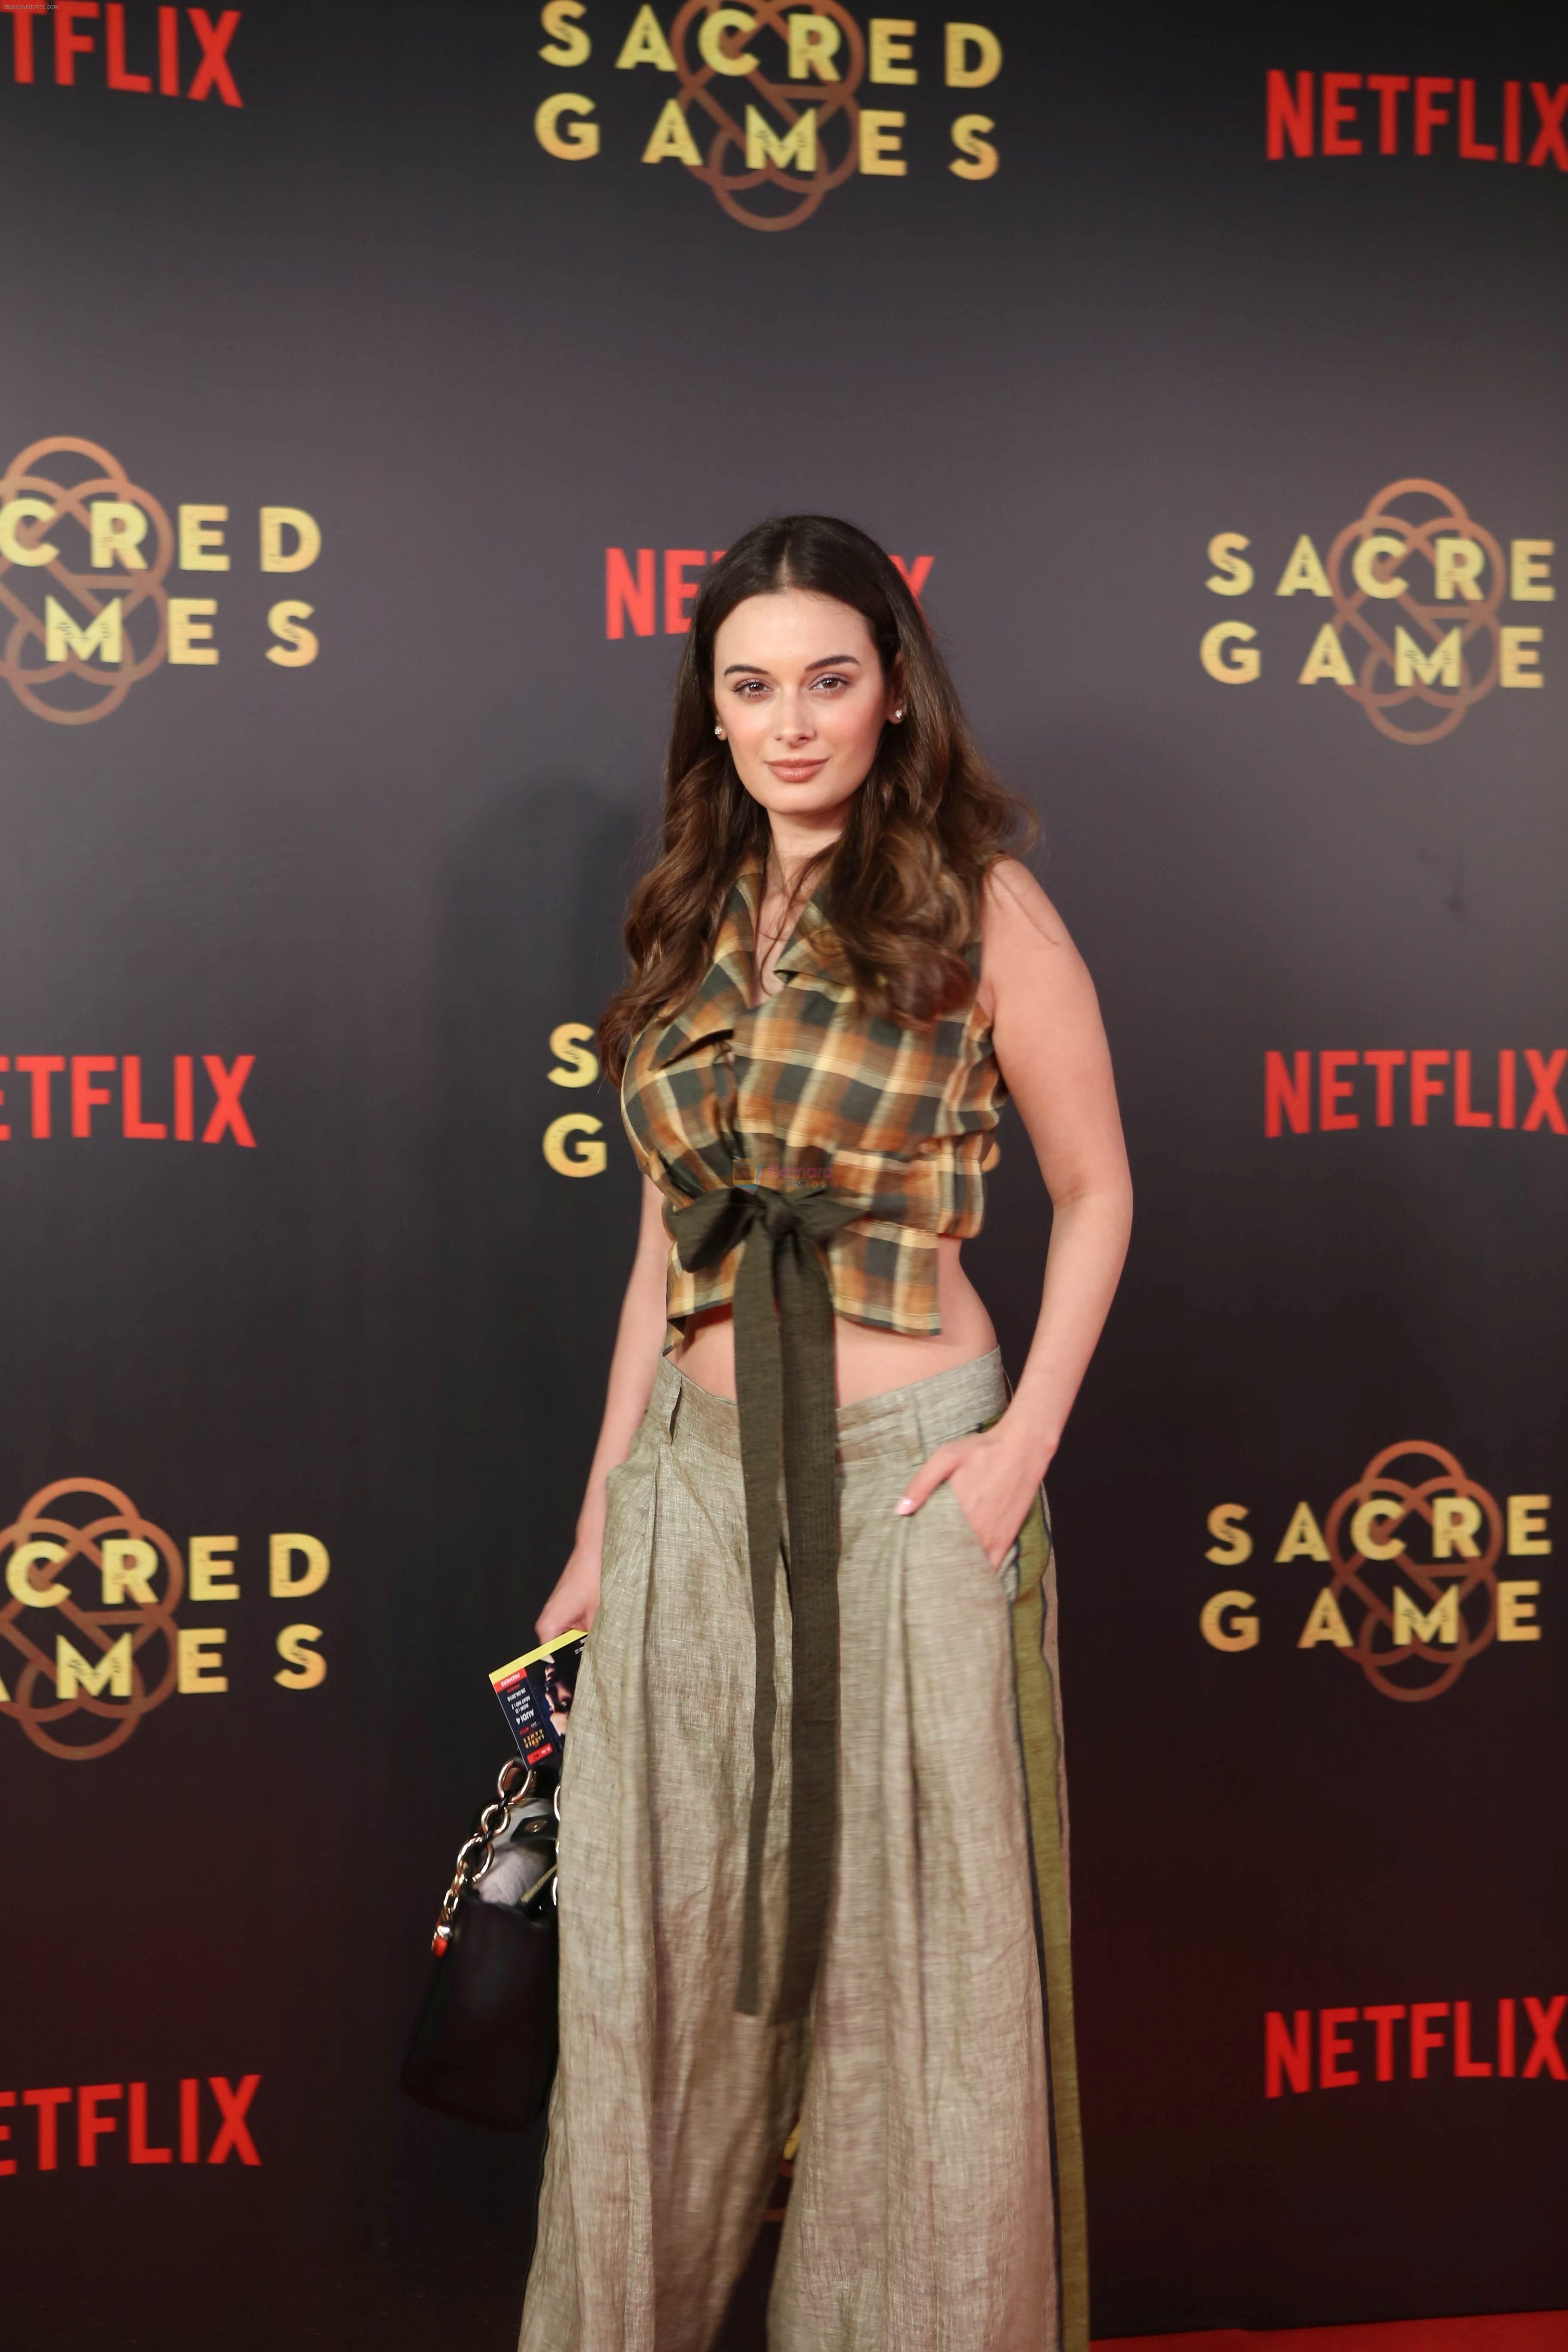 Evelyn Sharma at the Screening of Netflix Sacred Games in pvr icon Andheri on 28th June 2018